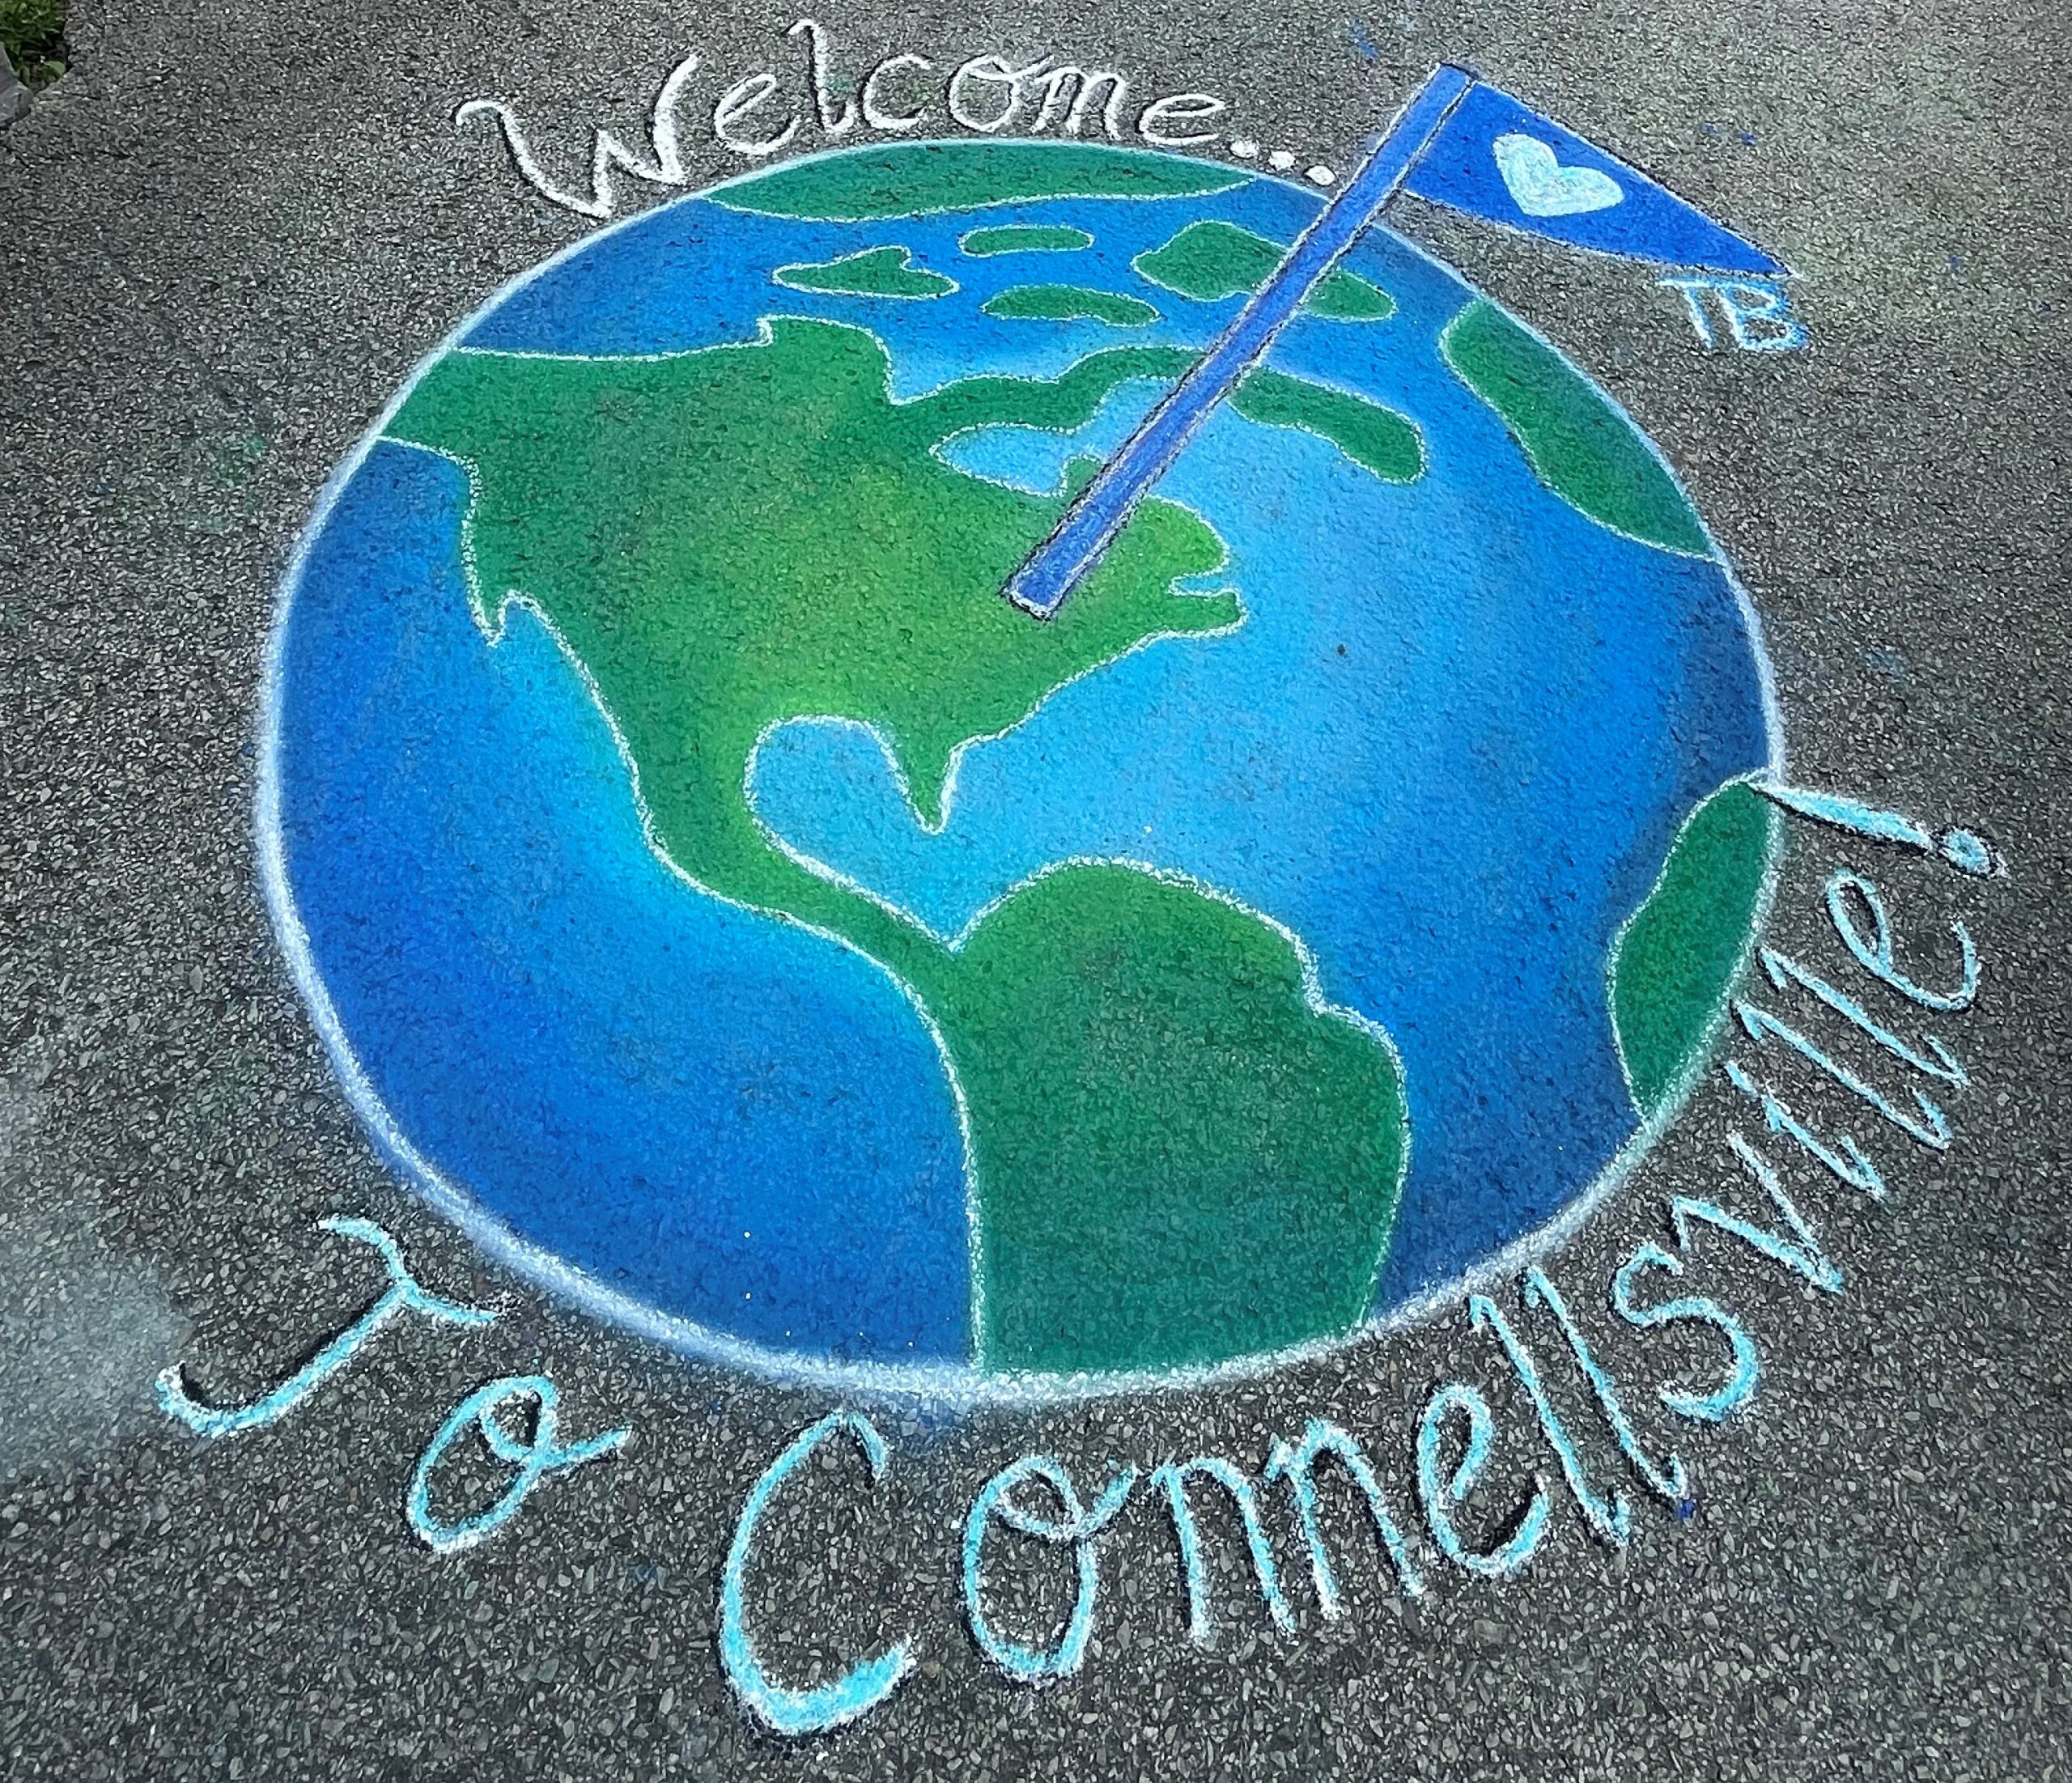 chalk drawing of the earth on pavement that says welome to Connellsville